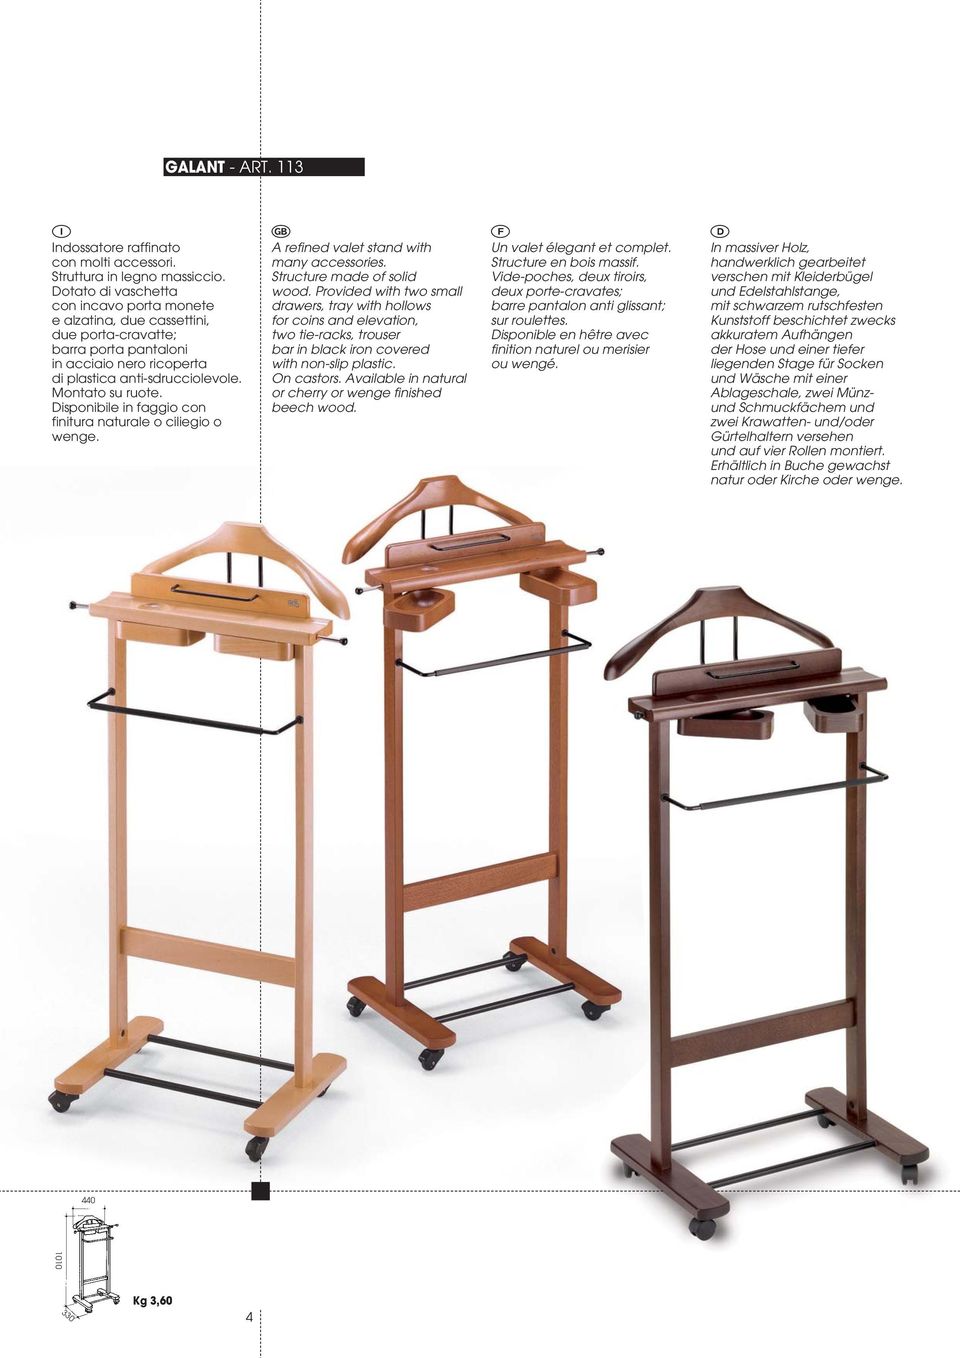 finitura naturale o ciliegio o wenge. A refined valet stand with many accessories. Structure made of solid wood.